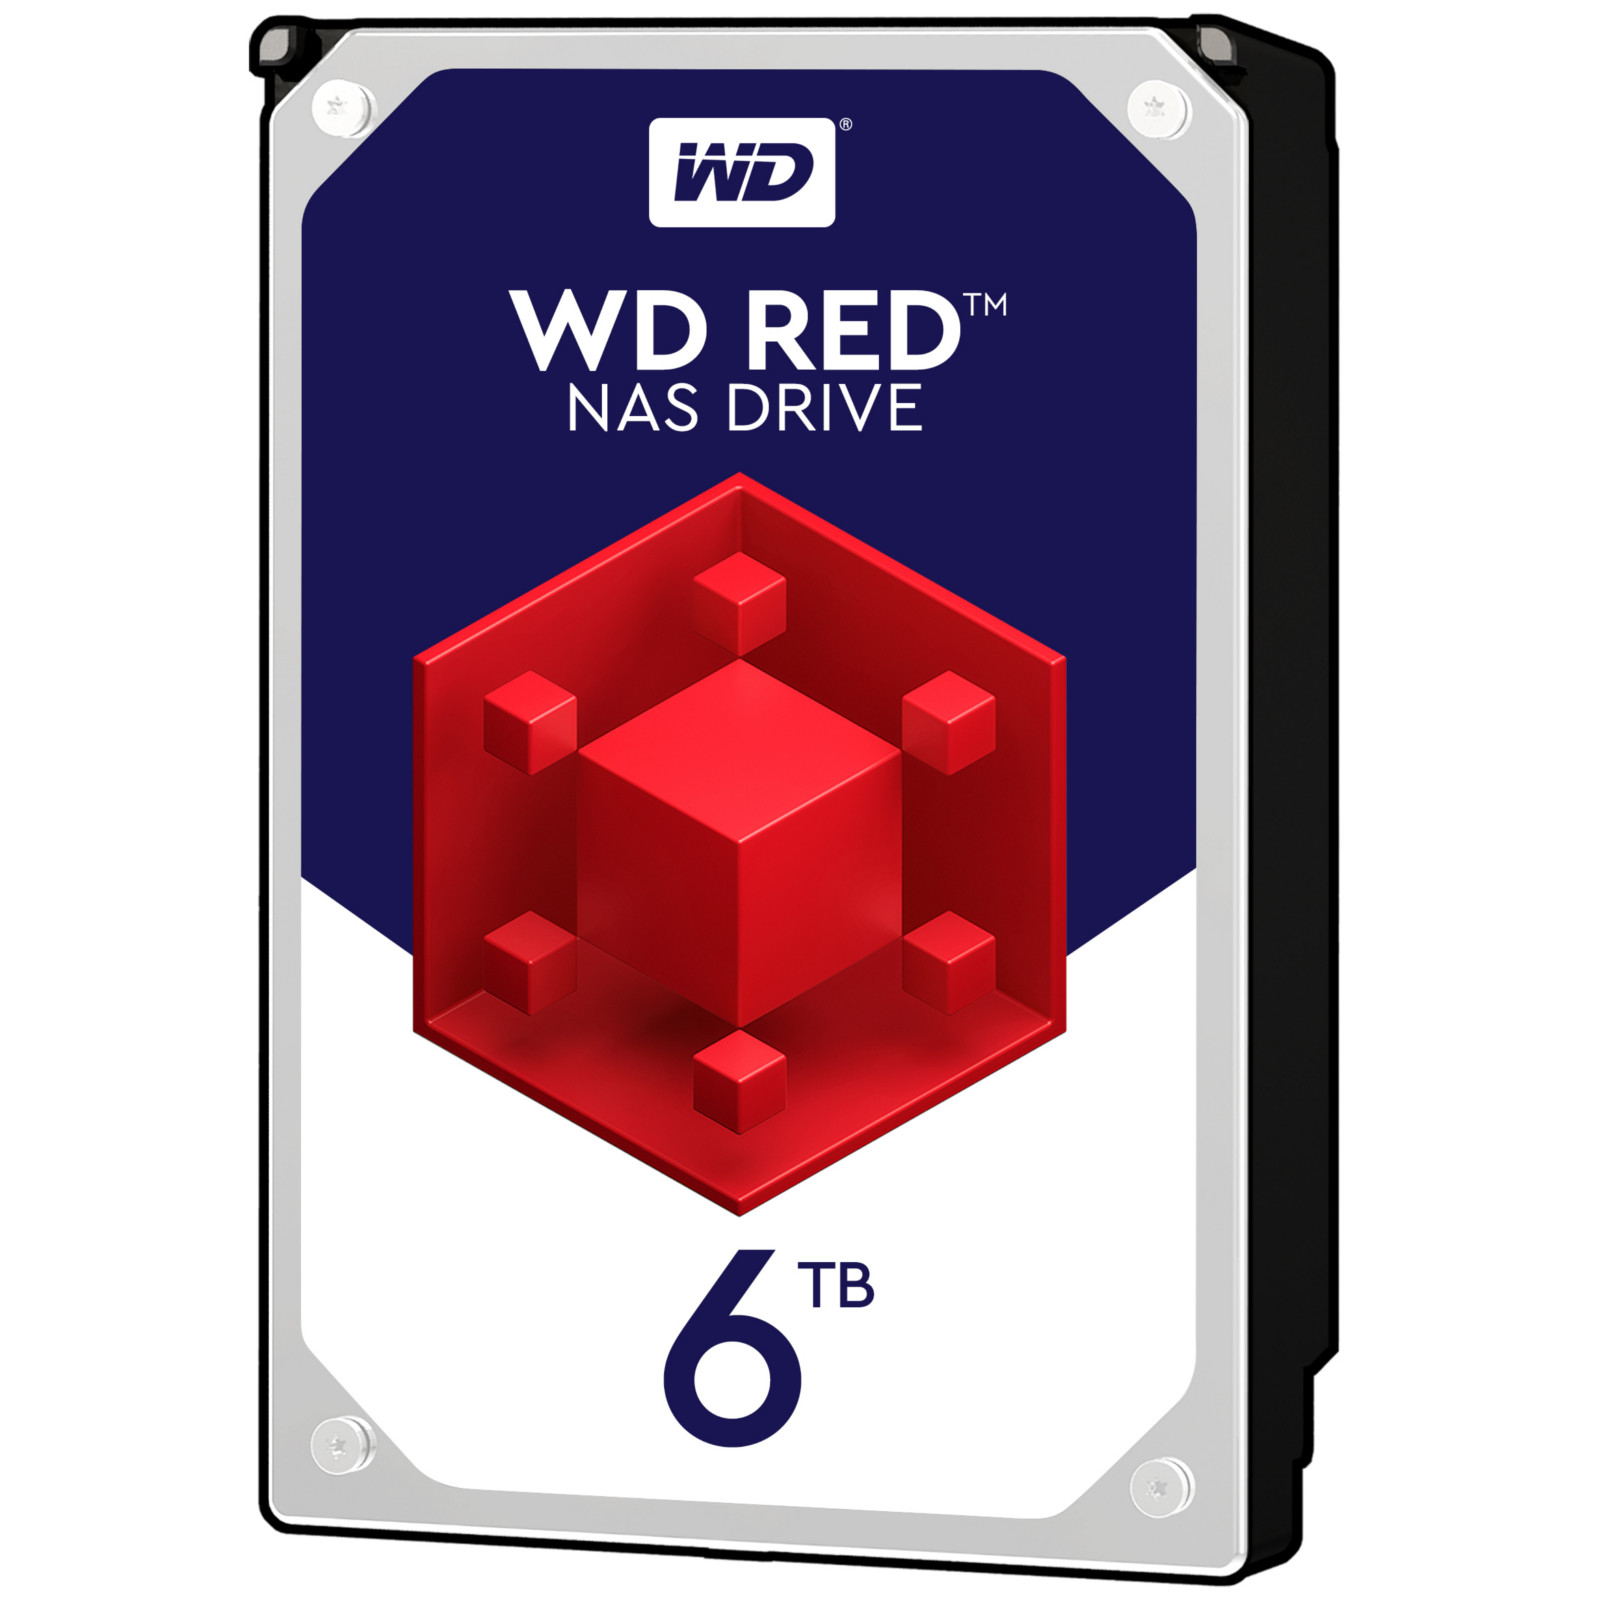 WD - WD 6TB Red 5400rpm HDD 256MB Cache Internal NAS Hard Drive (WD60EFAX)